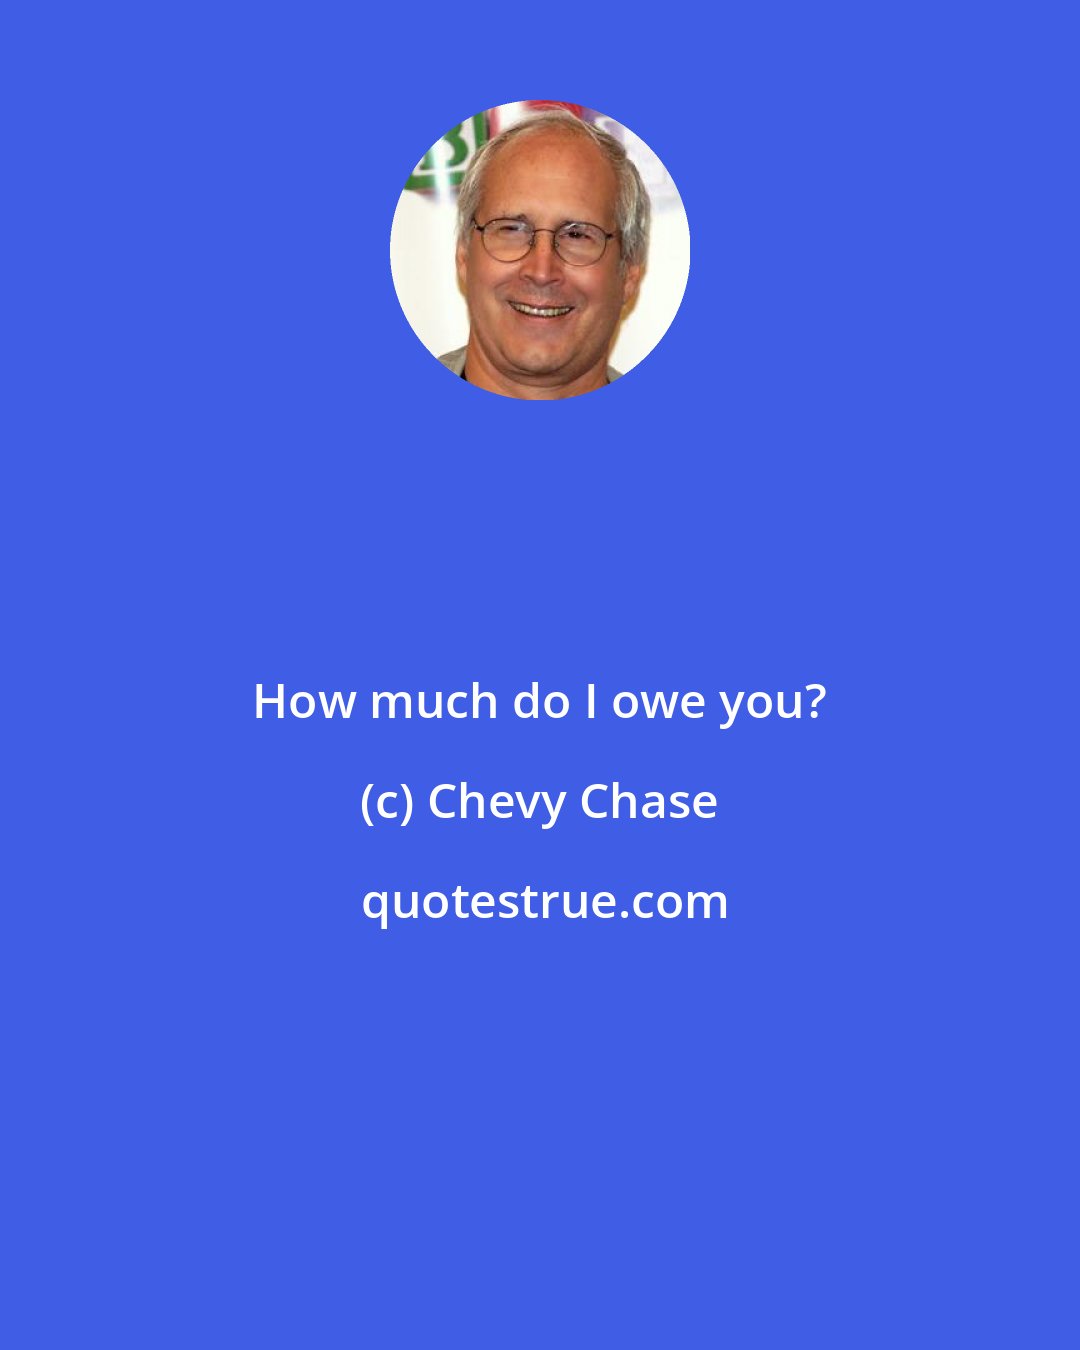 Chevy Chase: How much do I owe you?